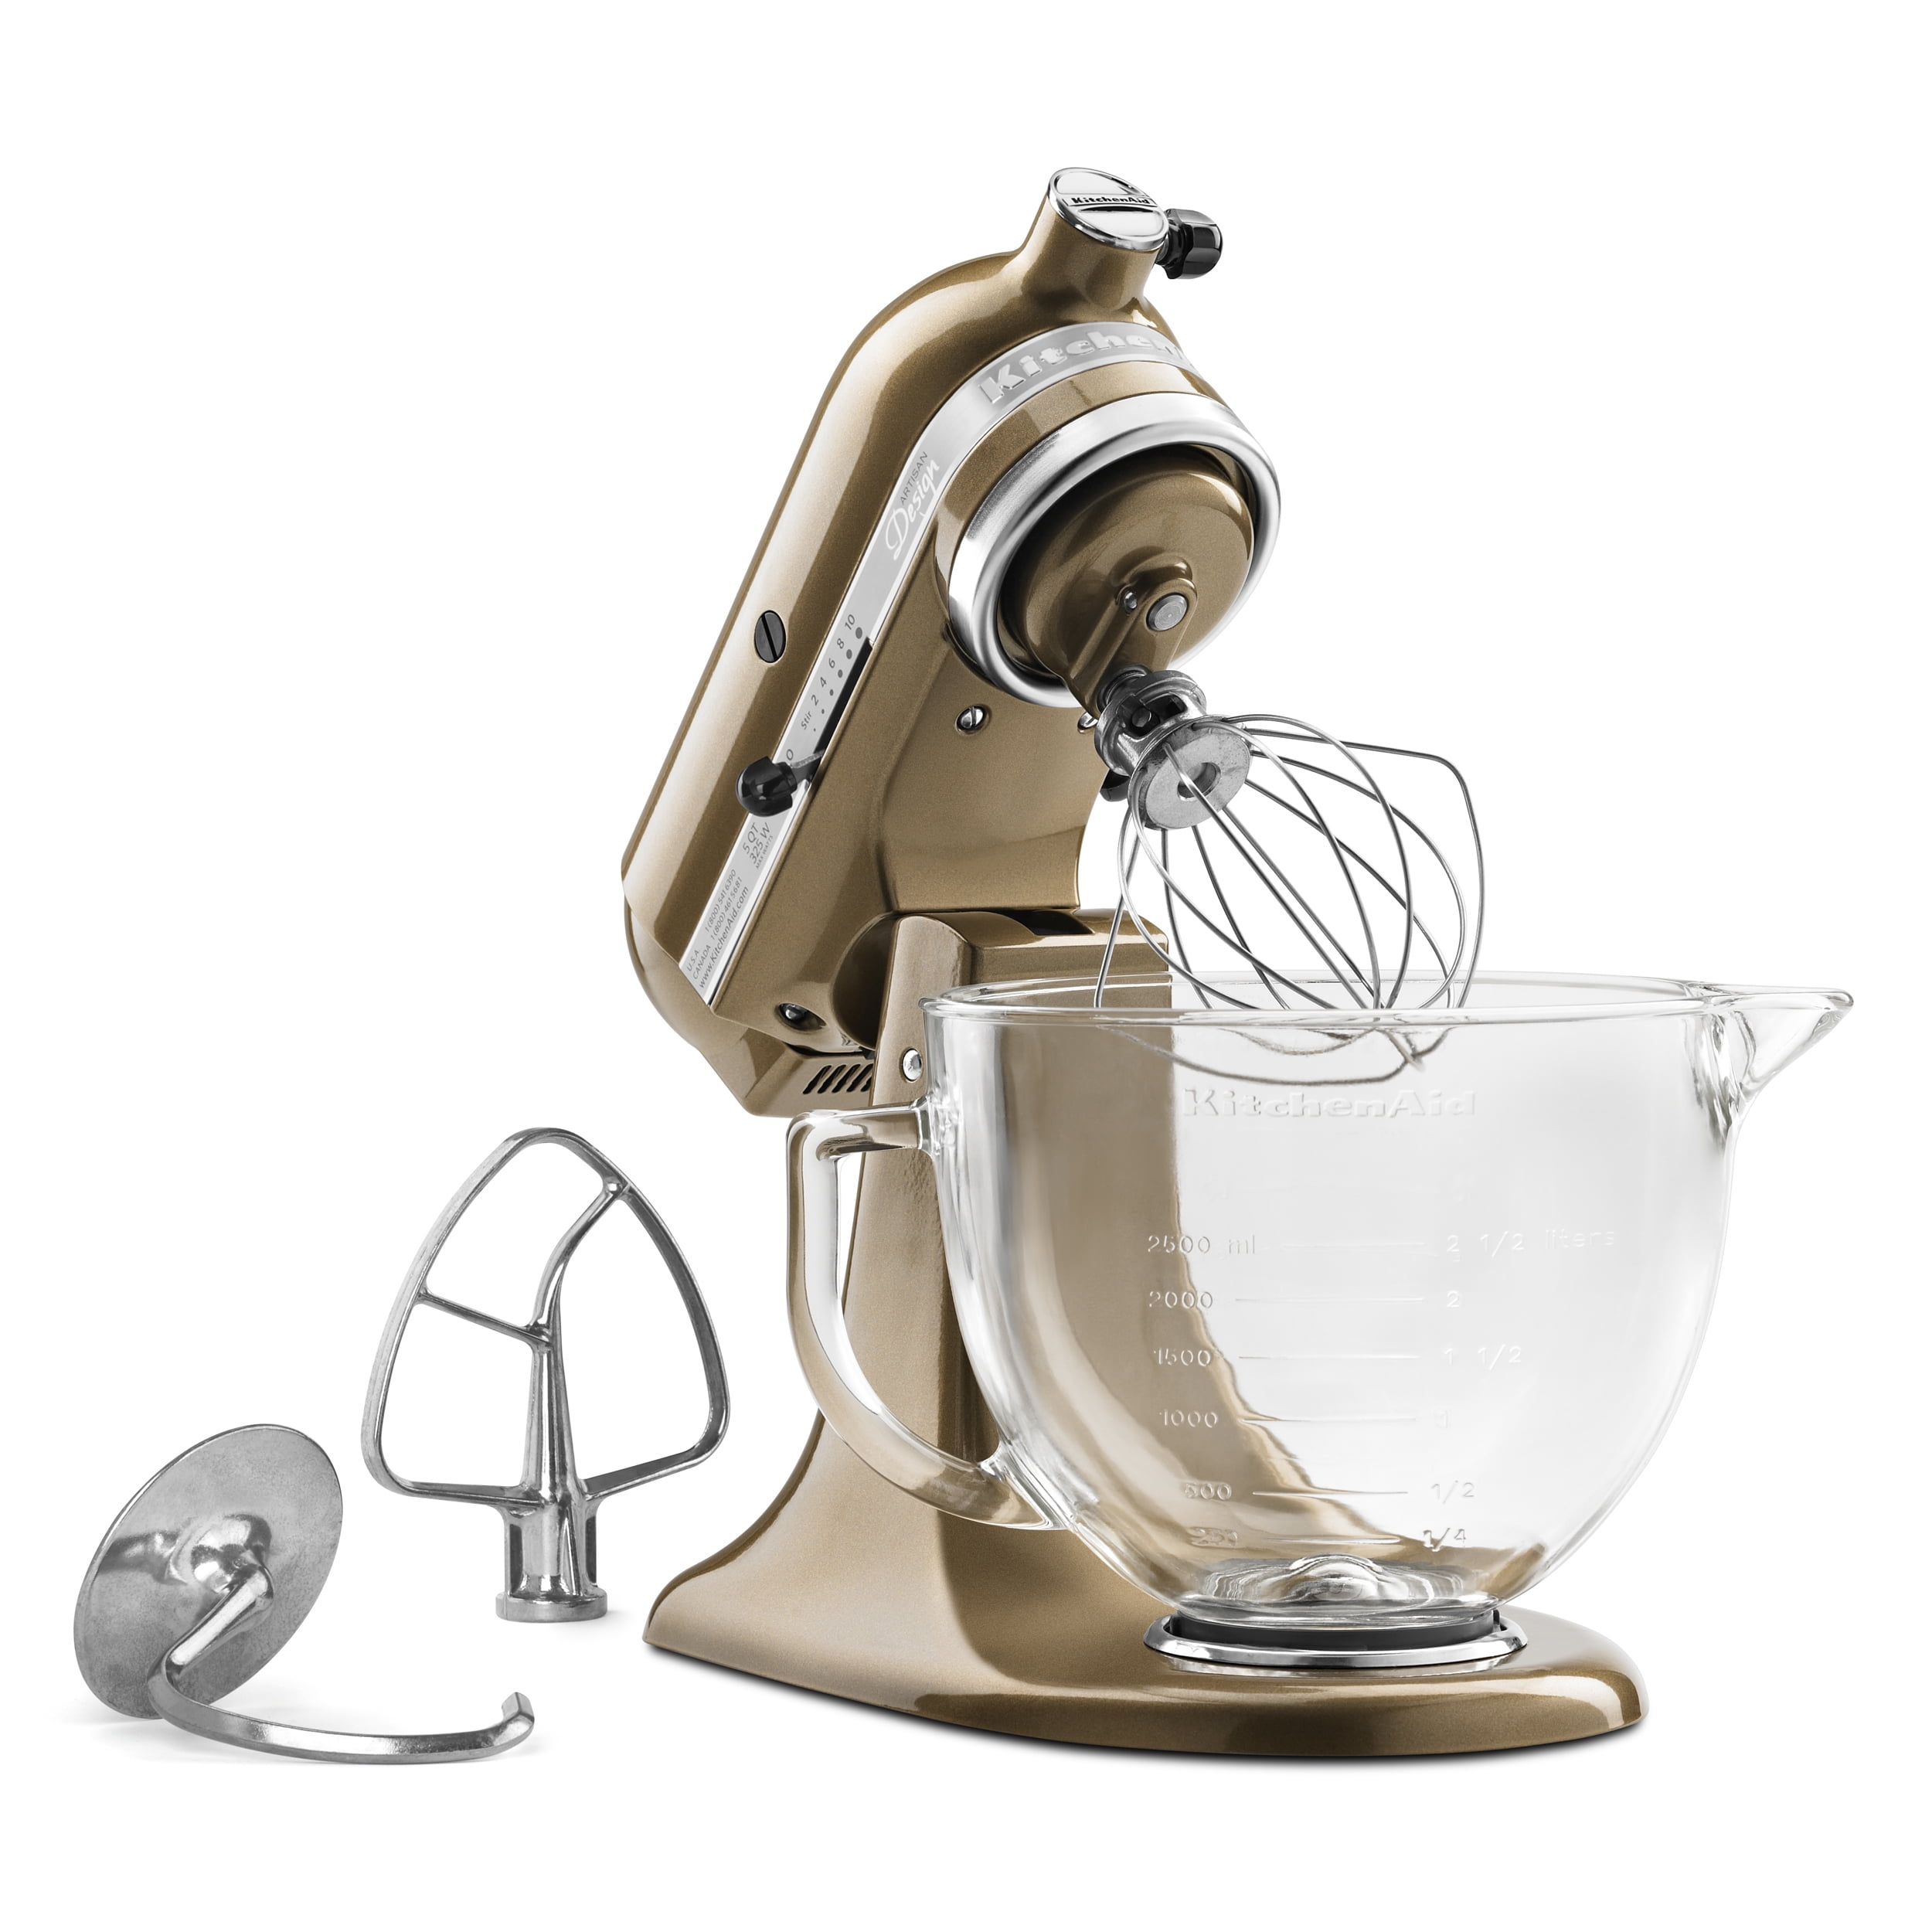 AIEVE Stand Mixer Cover Compatible with KitchenAid 4.5-5 Quart